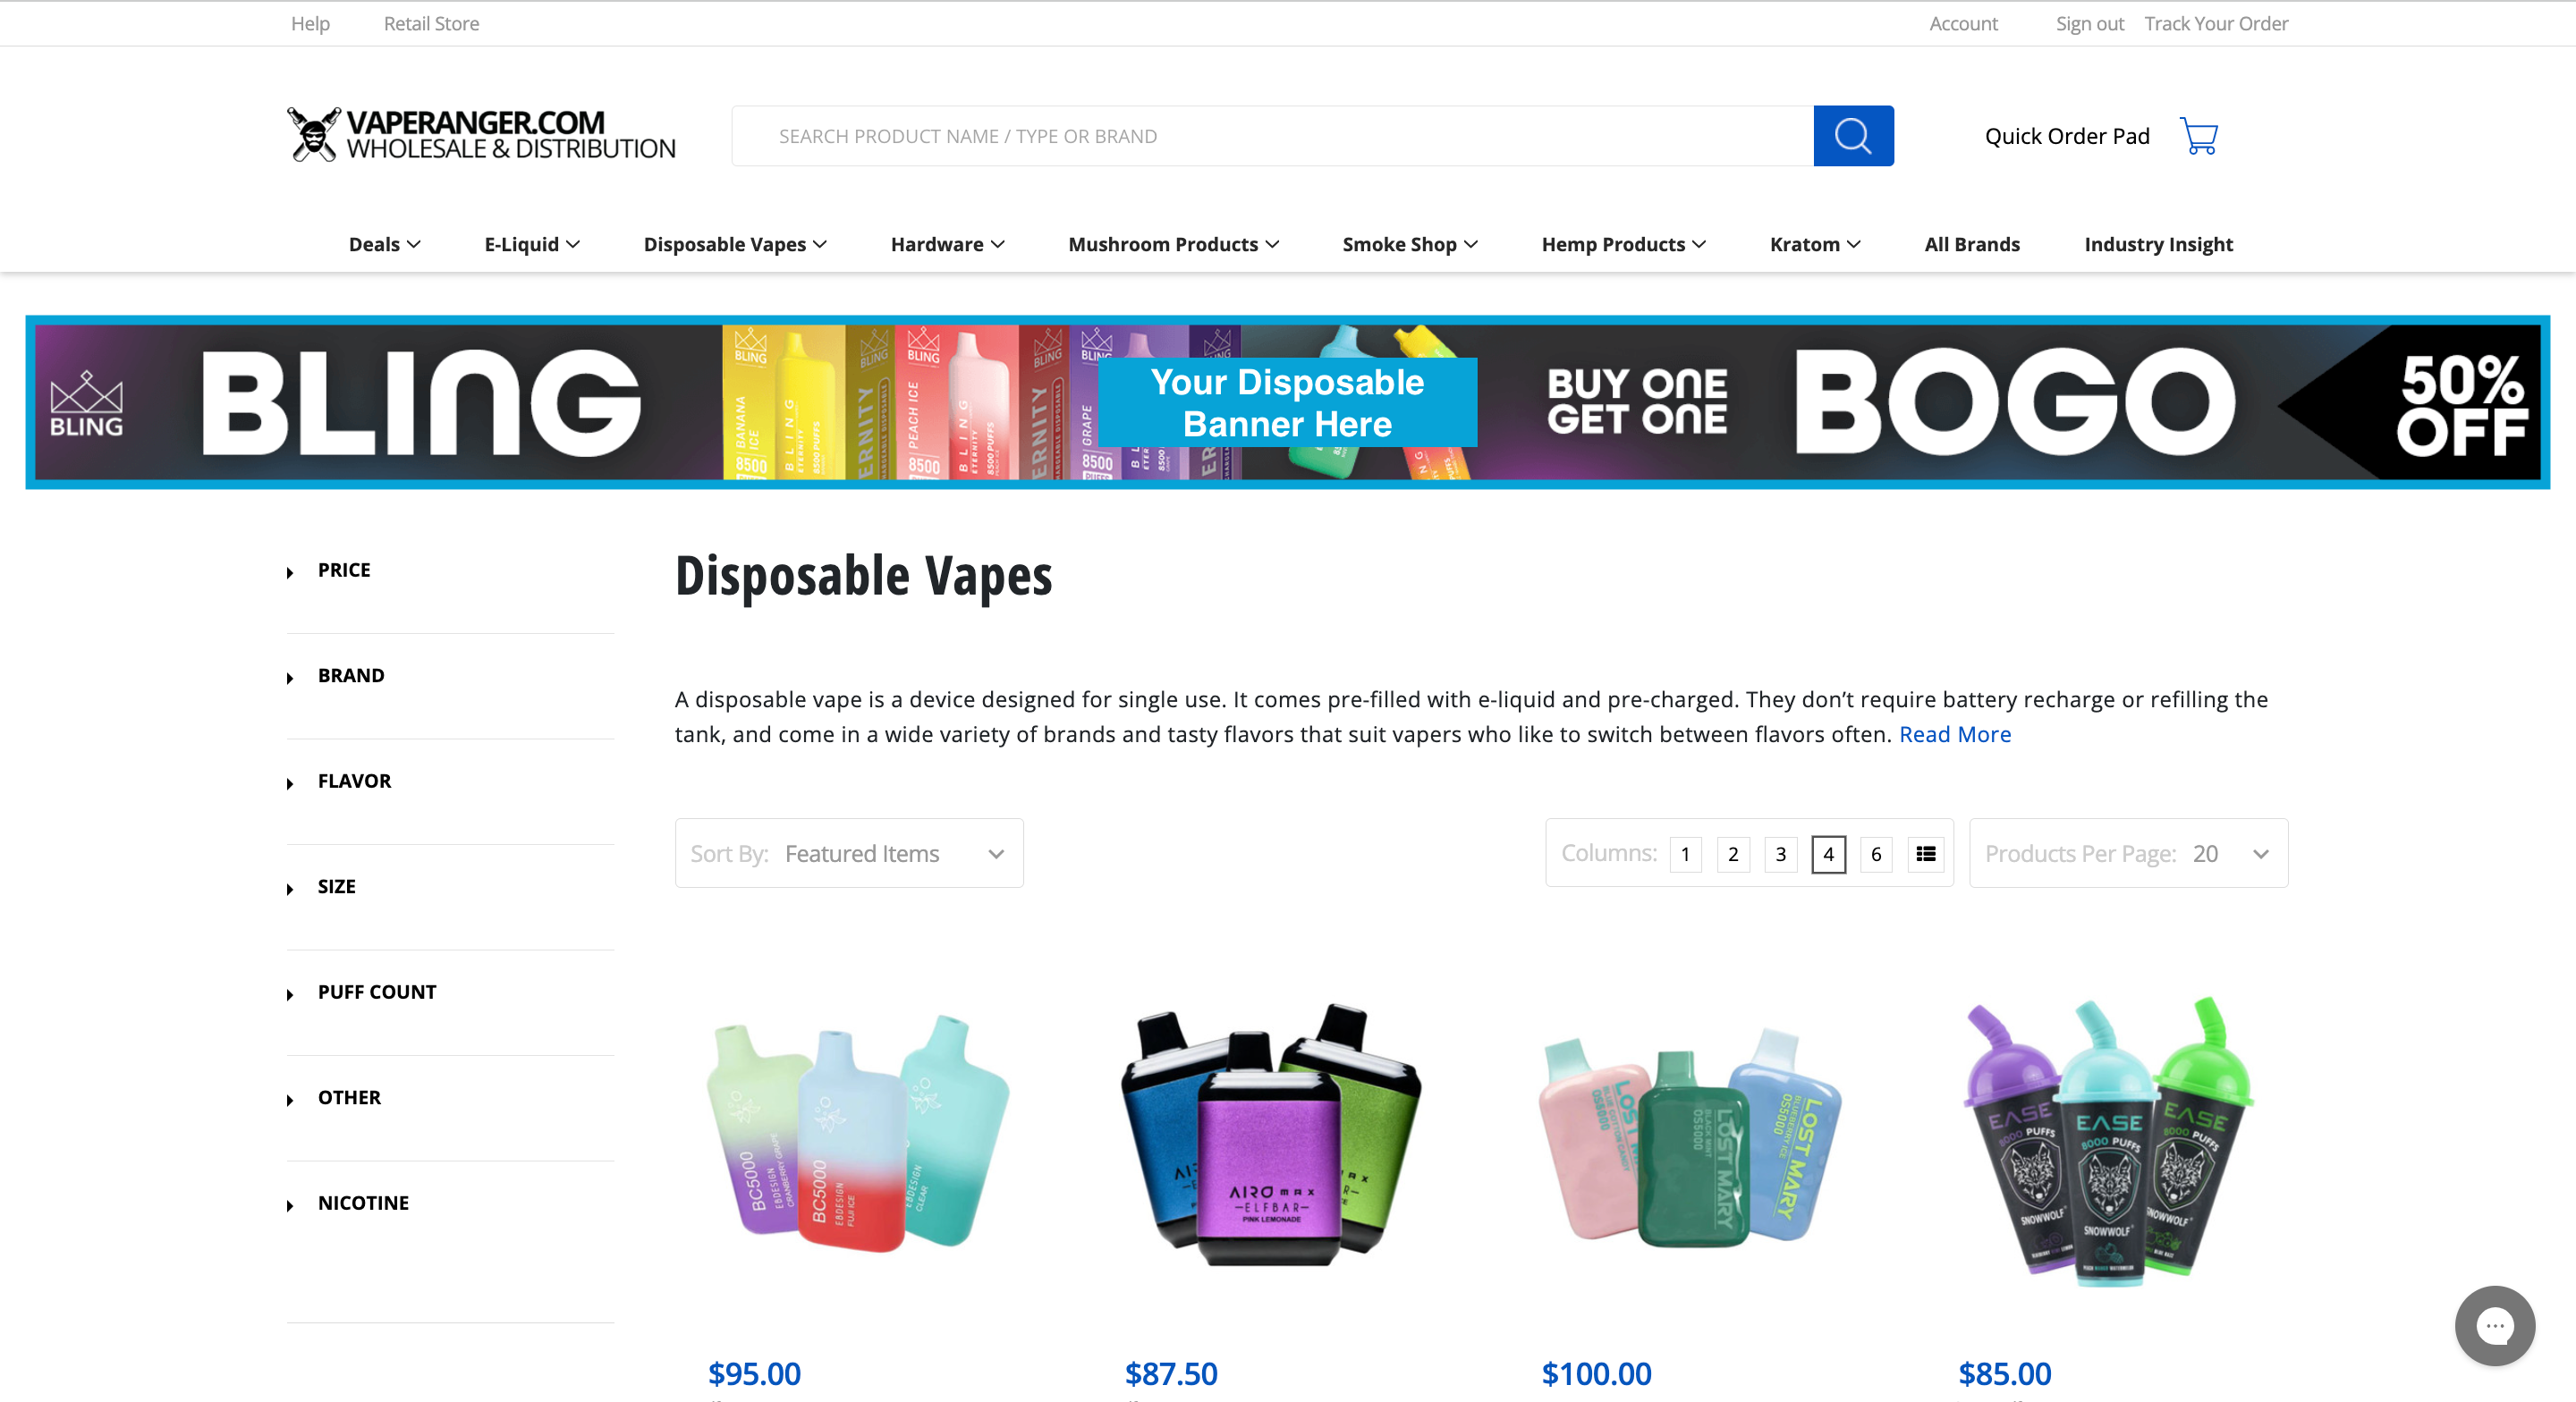 Category Page Banners